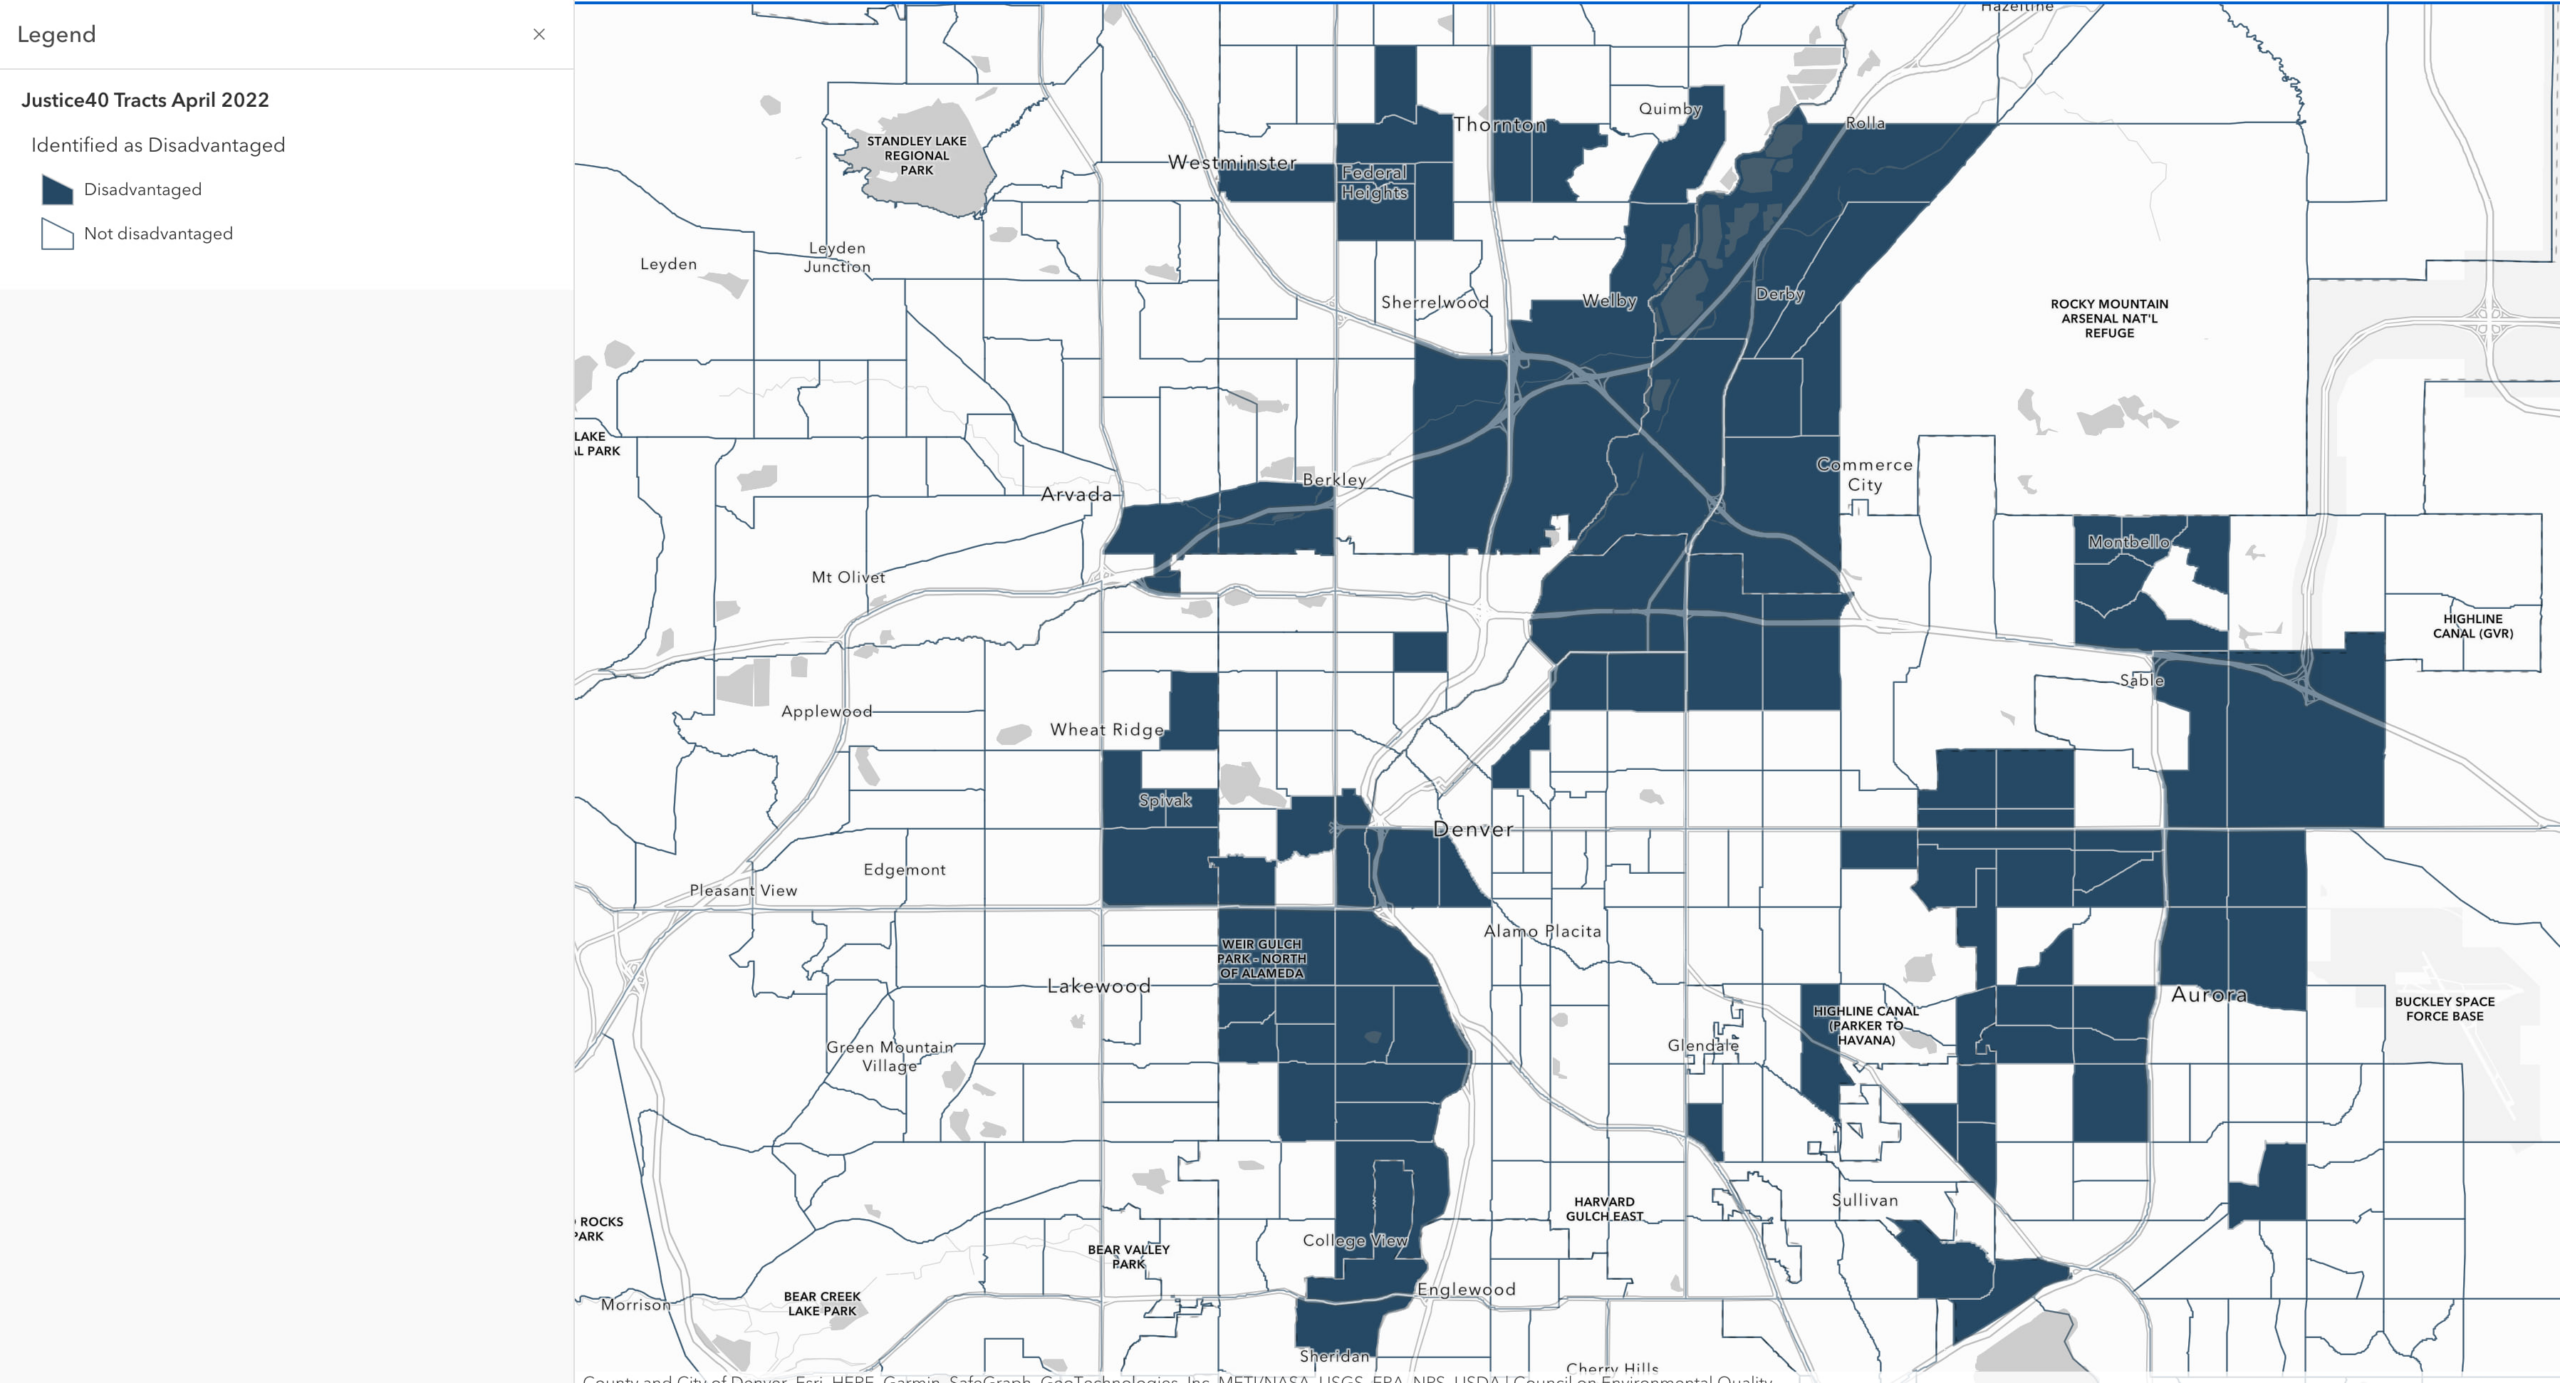 Justice40 tracts in Denver, CO. Here the disadvantaged tracts are full blue, and basemap is Human Geography, a neutral gray that does not compete with the colors used in the symbology.